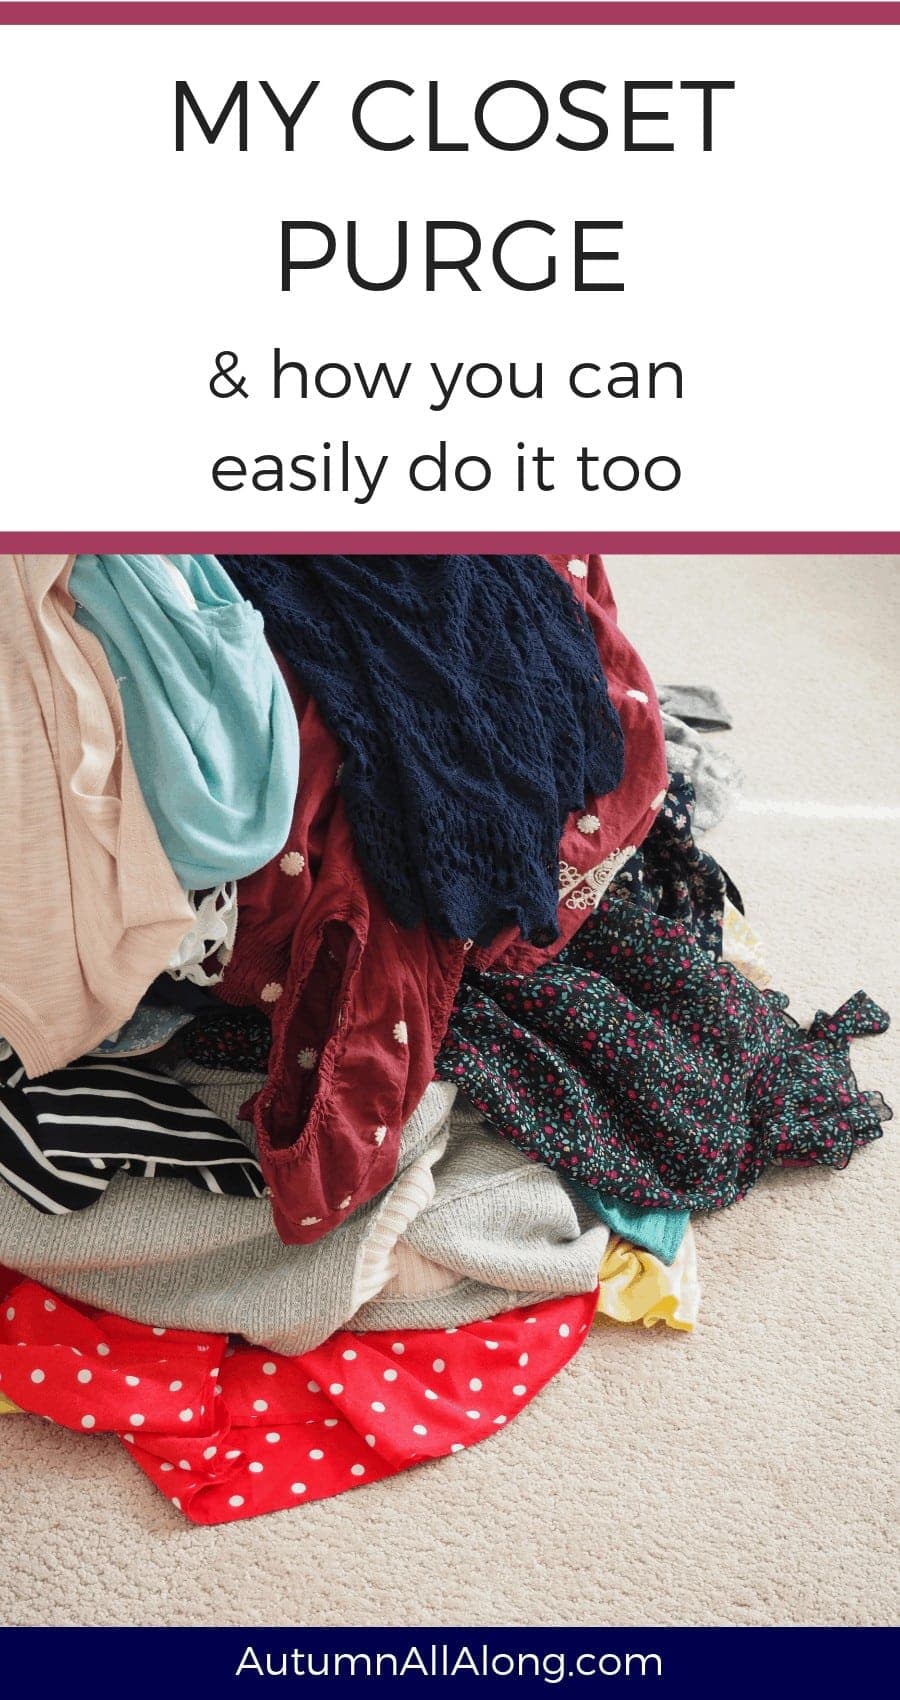 My closet has been a place of misery for way too long. I've spent the last few months deciding how I am going to eliminate my closet and cake up with the best system for my closet purge with resources for you!. | via Autumn All Along